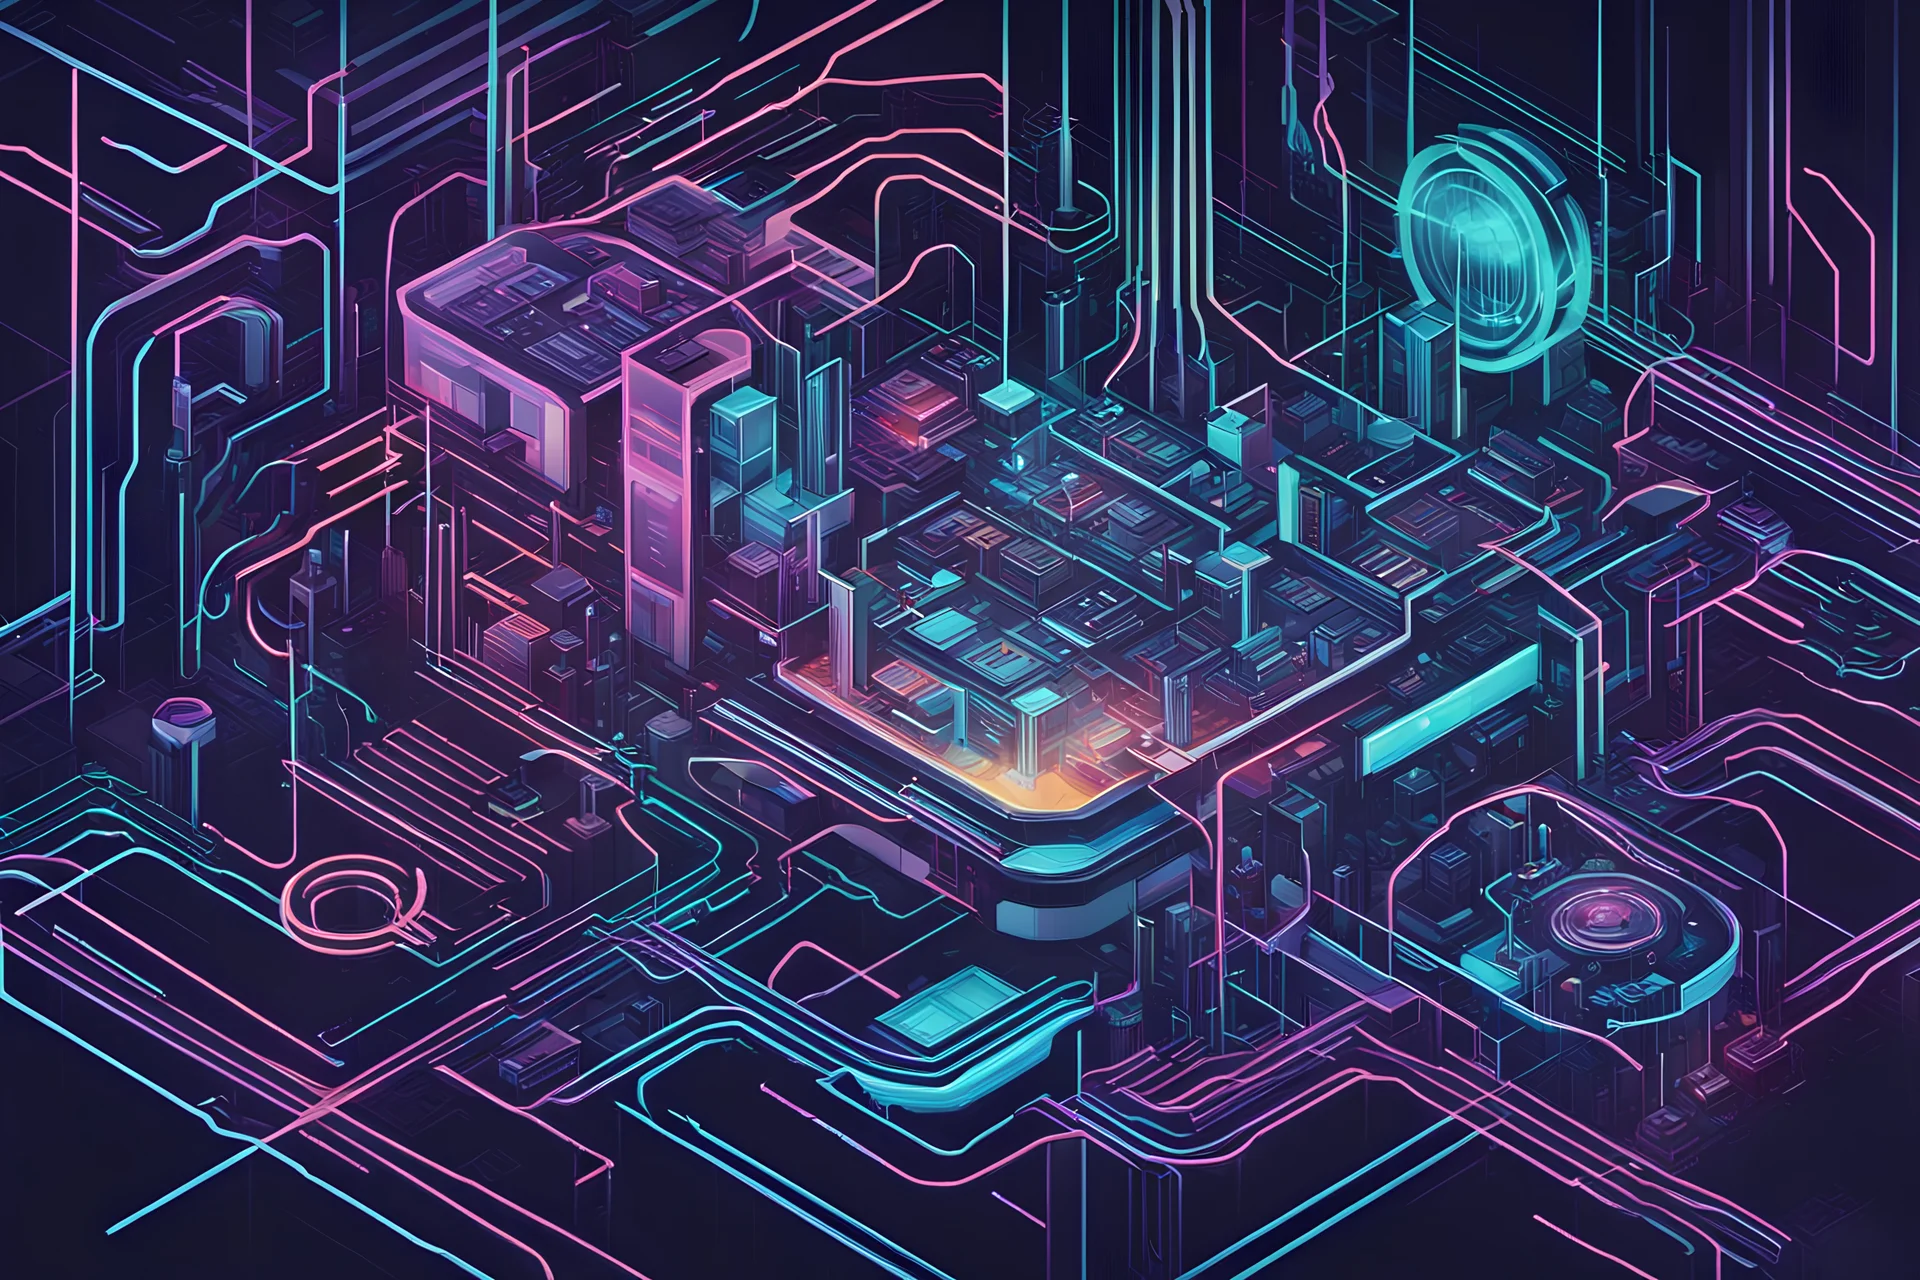 Abstract depiction of a futuristic factory, with connected elements like a computer chip. Make it colorful and stylised. Emphasis on complexity but make it clean and neat. Top down view. A network of abstract iridescent lines and parts that are complex beyond understanding yet somehow simple. Dark themed but pops of color